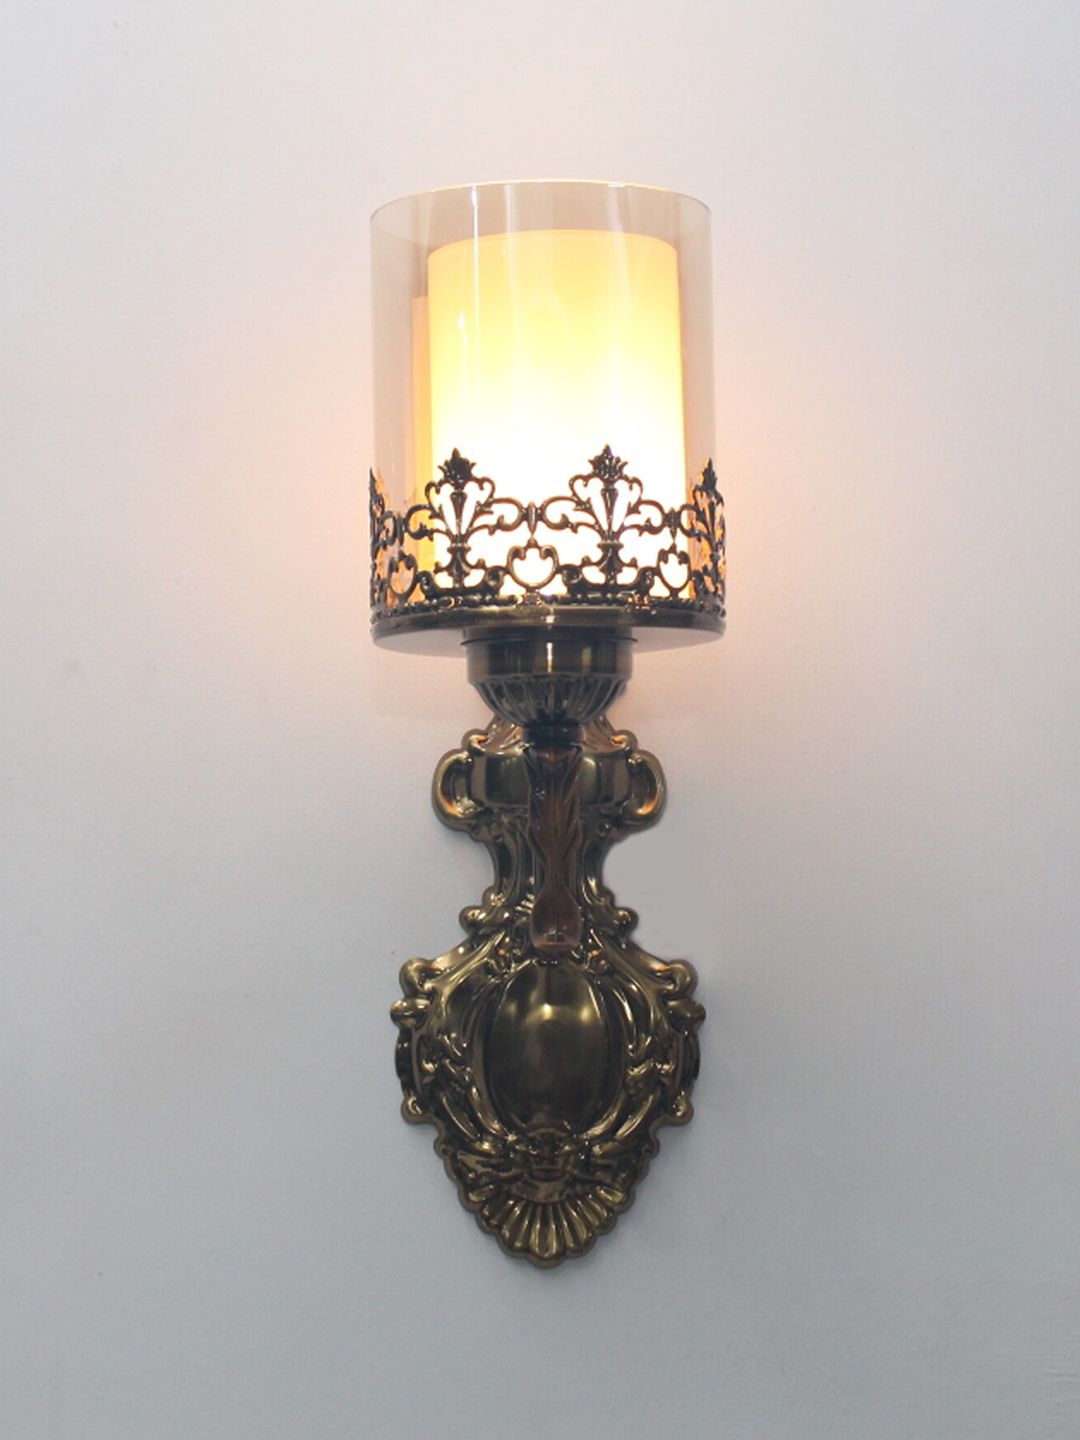 SHREE KALA HOME DECOR Copper Toned Solid Wall Mounted Lamp Price in India